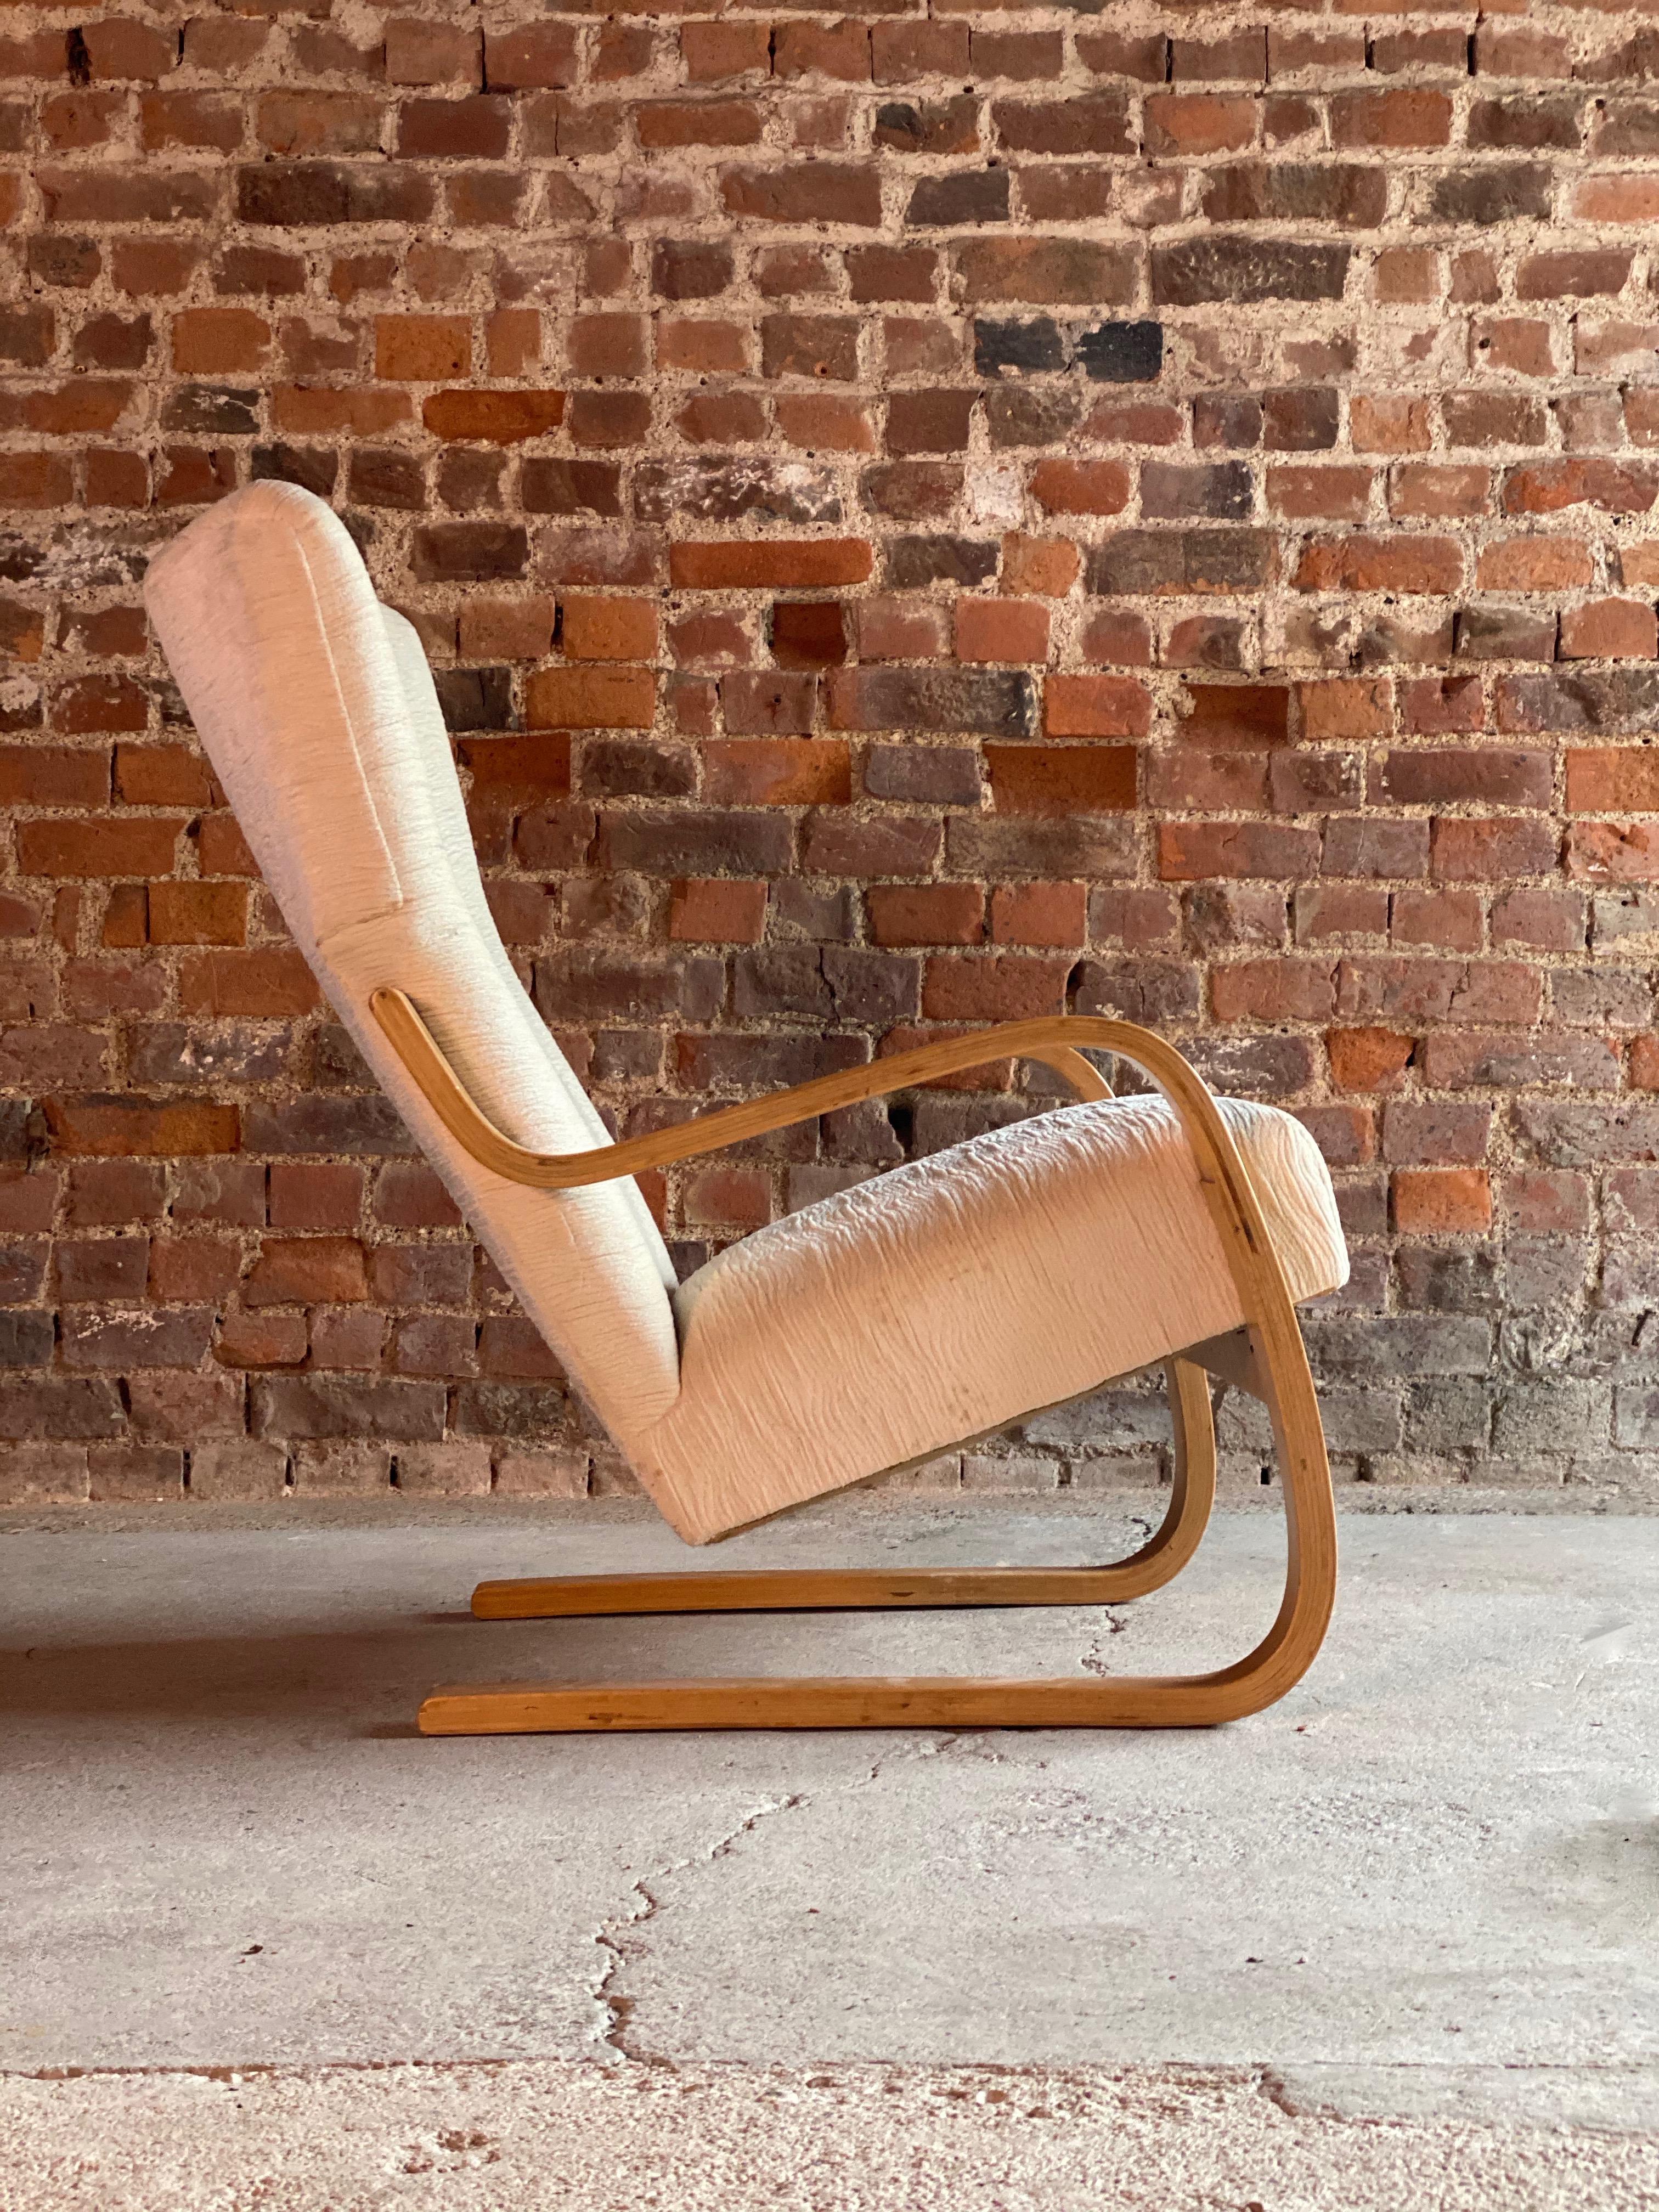 Alvar Aalto model 36 / 401 cantilever lounge chair by Finmar, Finland, circa 1940.

Rare early Alvar Aalto series 36 / 401 cantilever chair by Finmar circa 1940, the cantilevered birch ’S' shaped frame finished in cream upholstery, early original